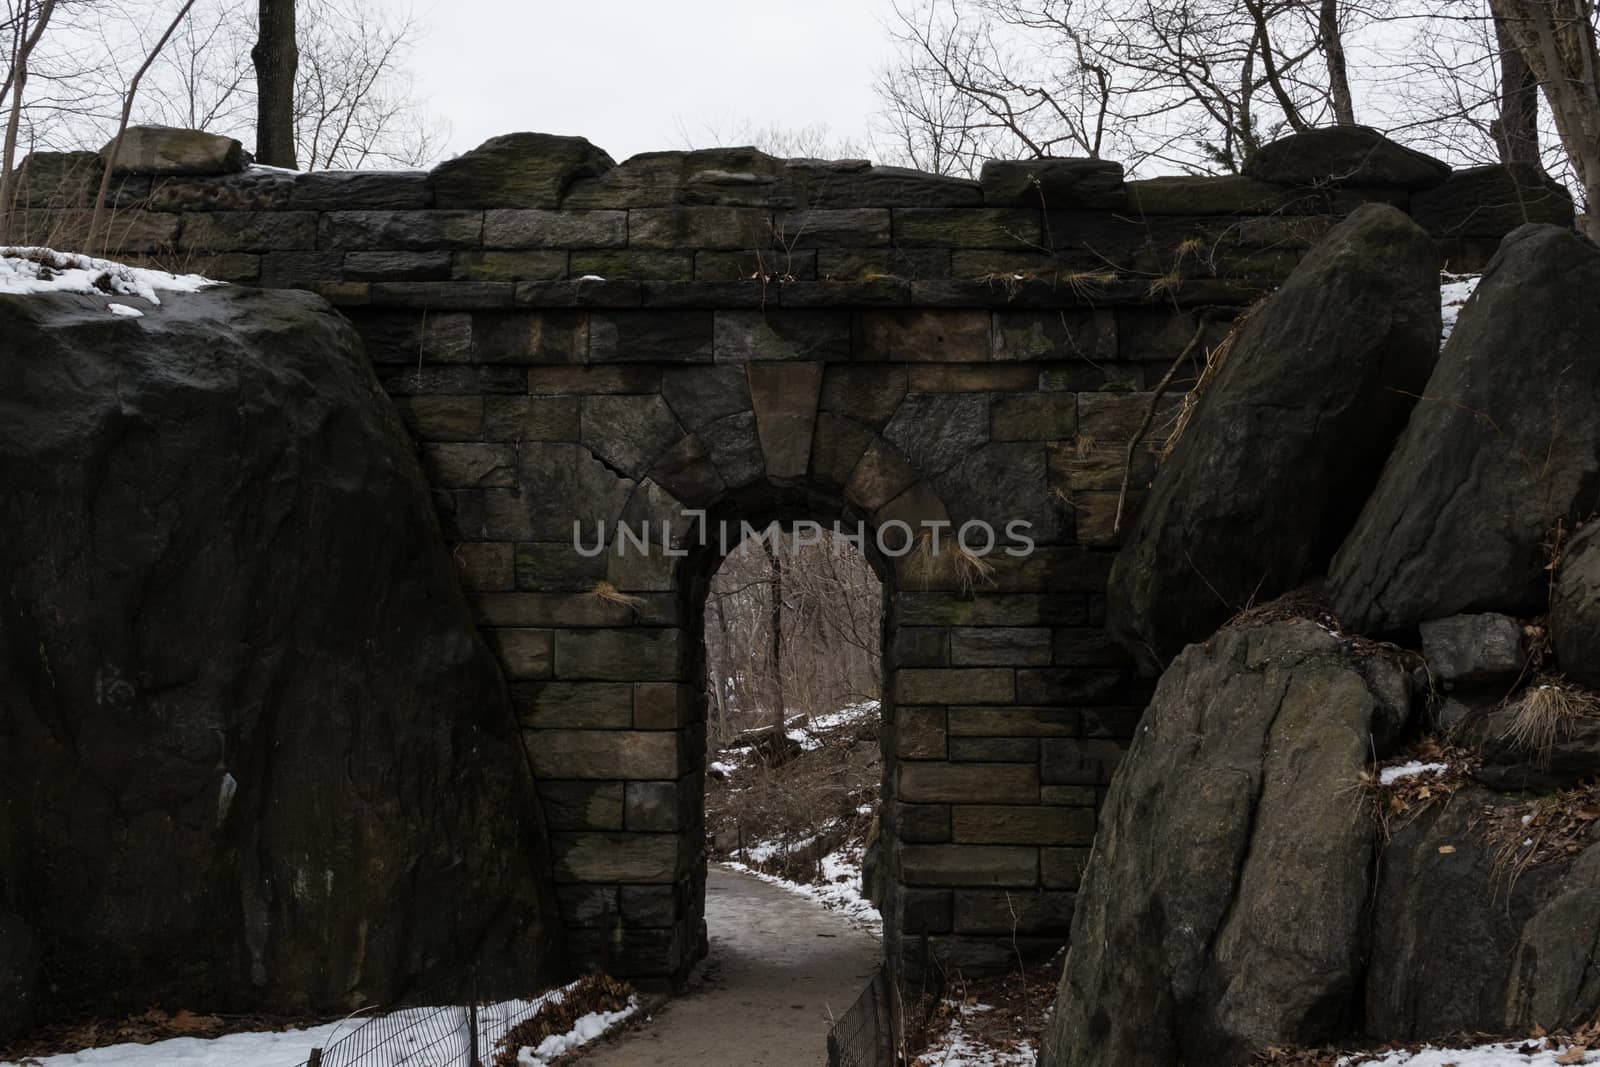 Ramble Stone Arch is located on the West side at 77th street and was built in 1920